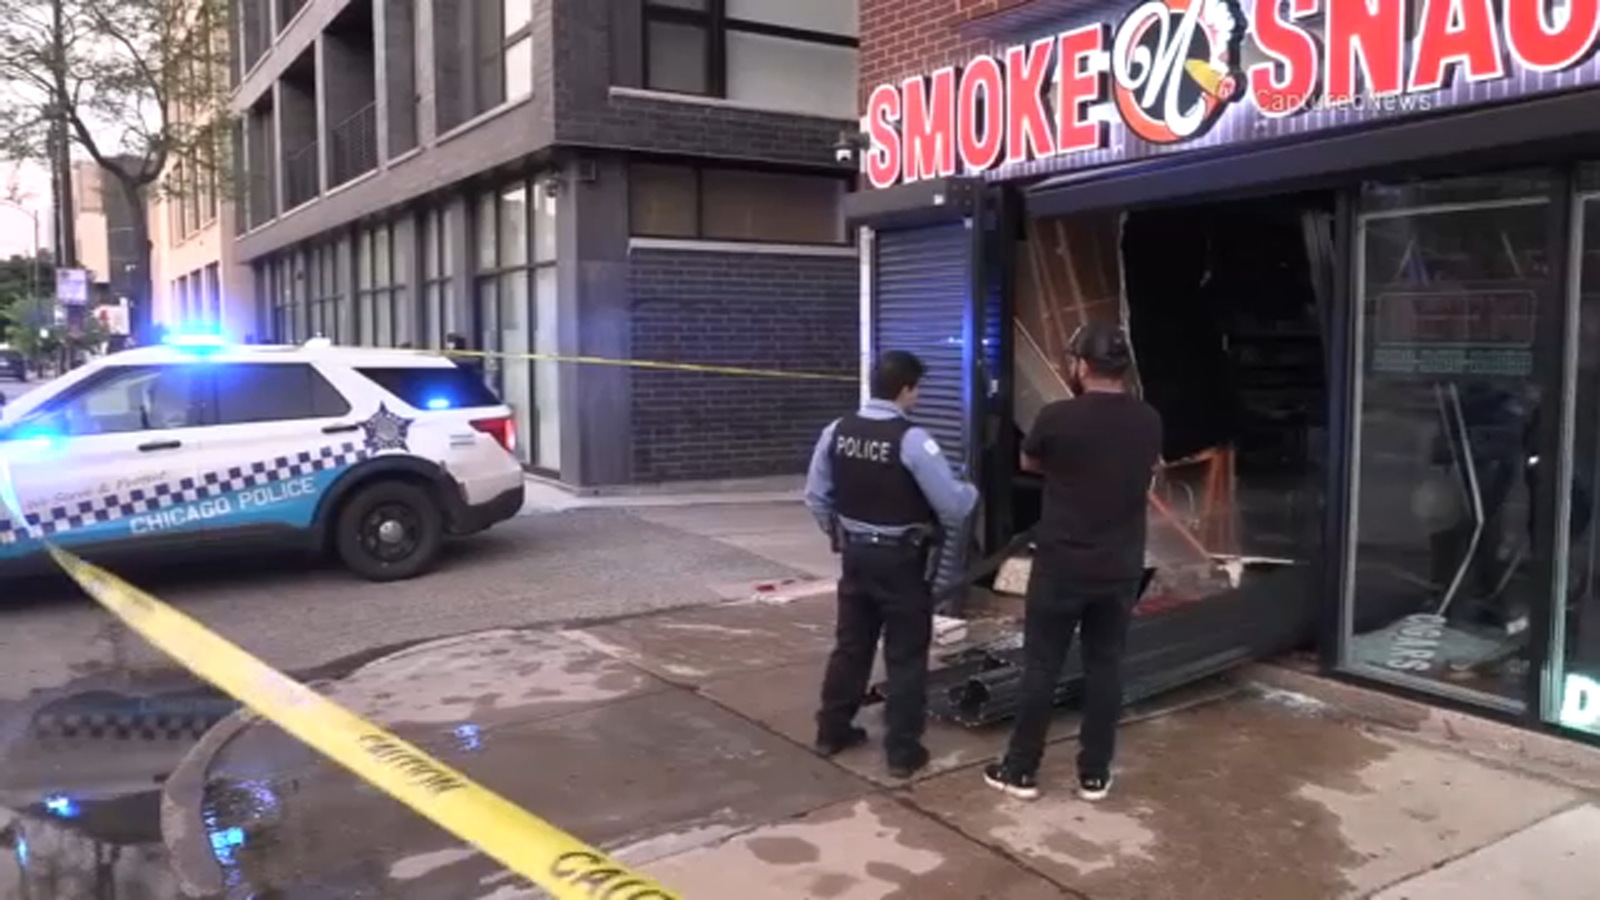 Chicago crime: Group crashes SUV into business, takes ATM on Western Avenue in Logan Square on Northwest Side, police say [Video]